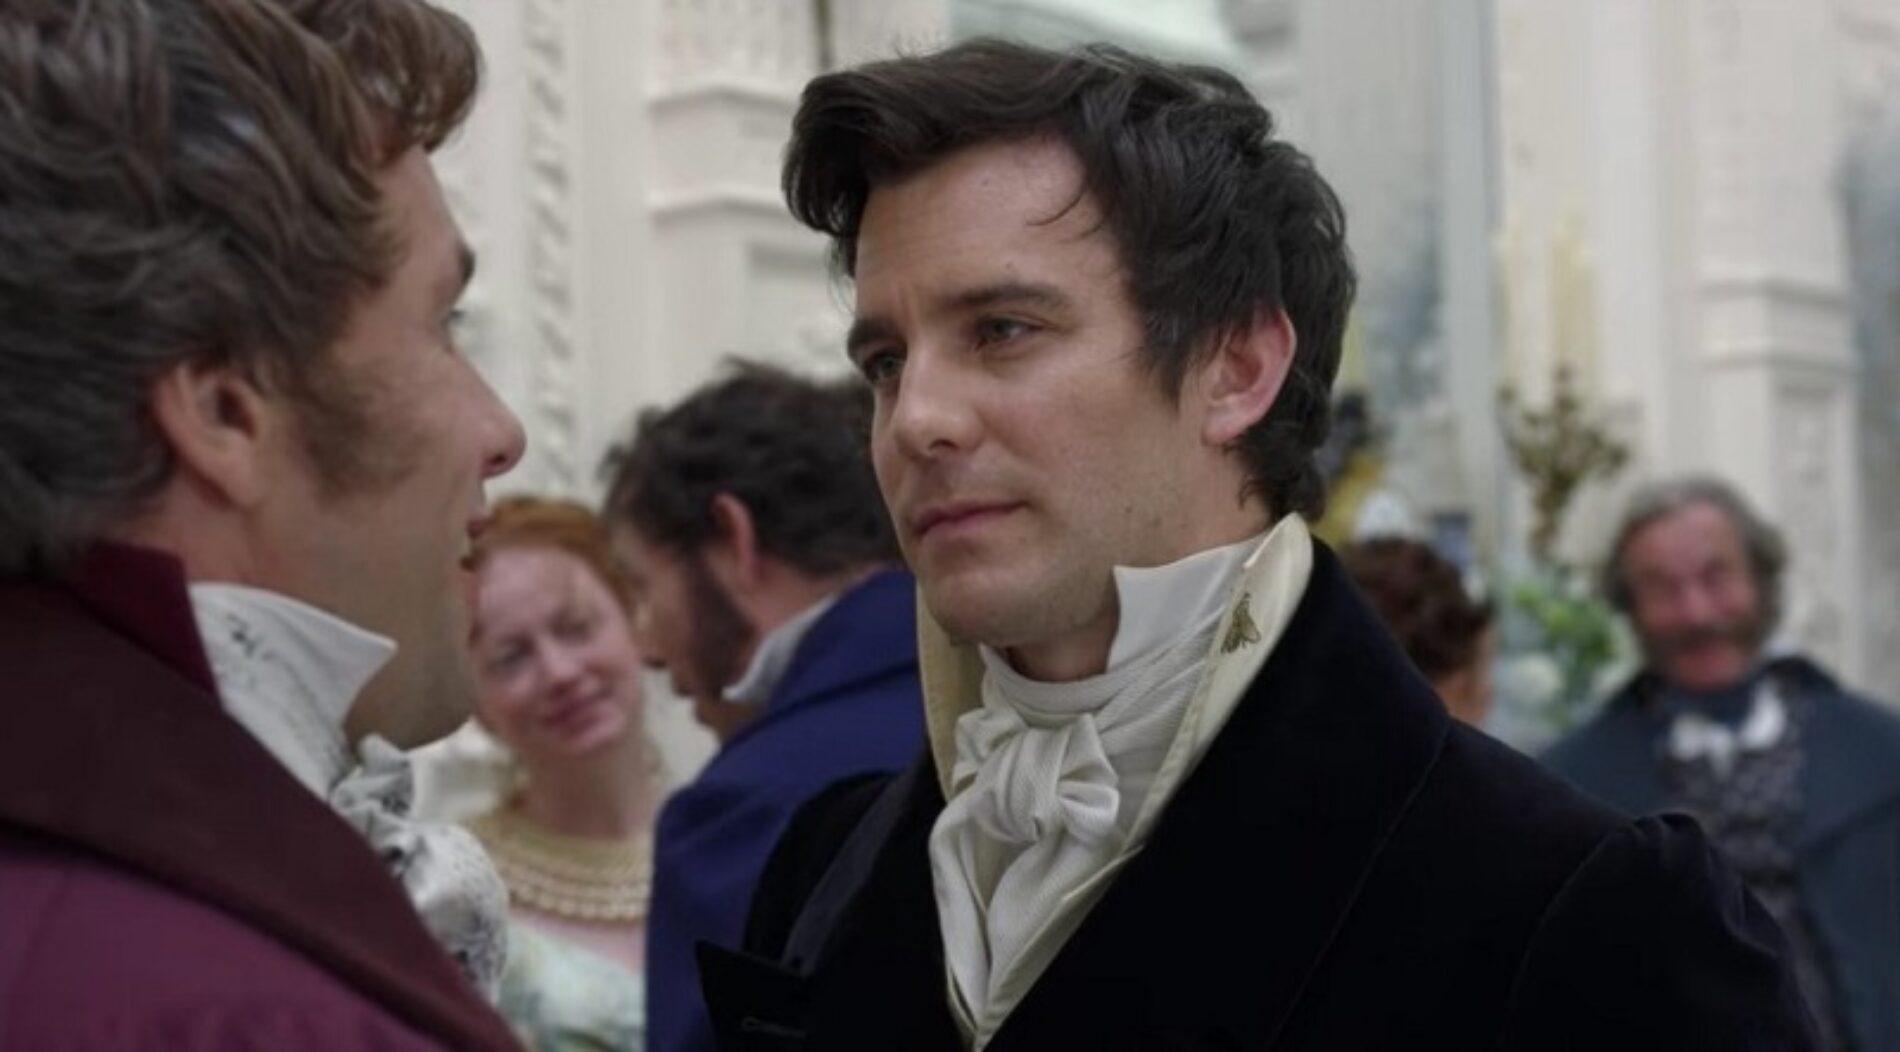 Who Else Expected Benedict Bridgerton To Be Gay?